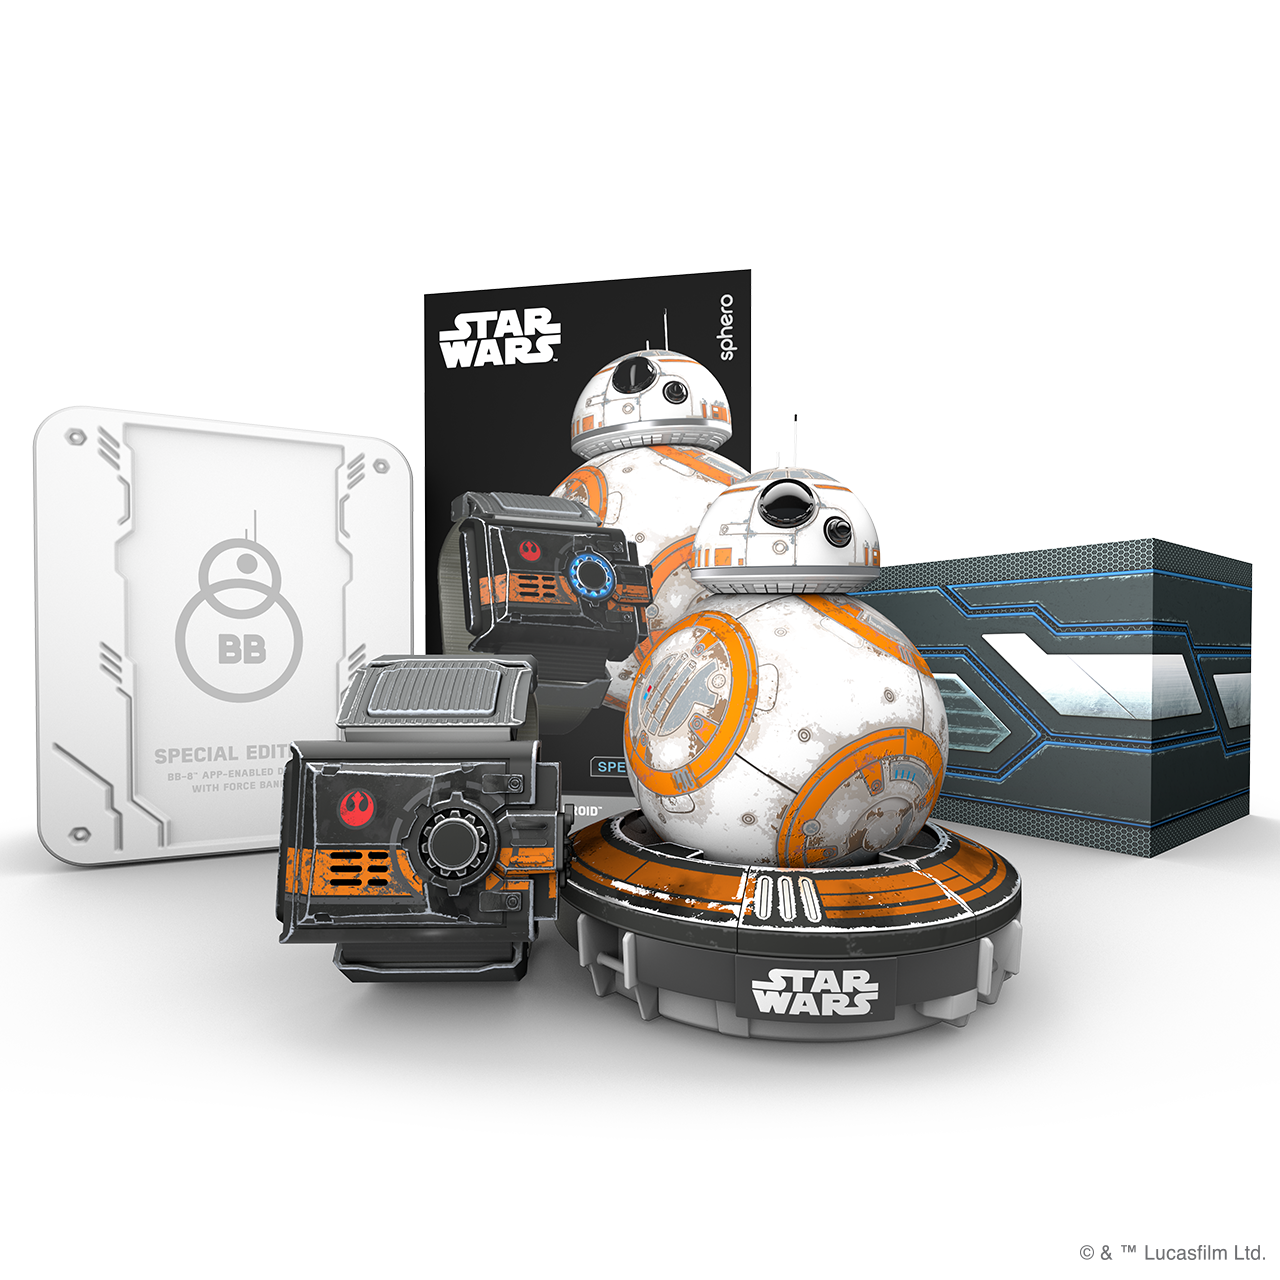 Sphero adds new Star Wars droids, including one from the upcoming